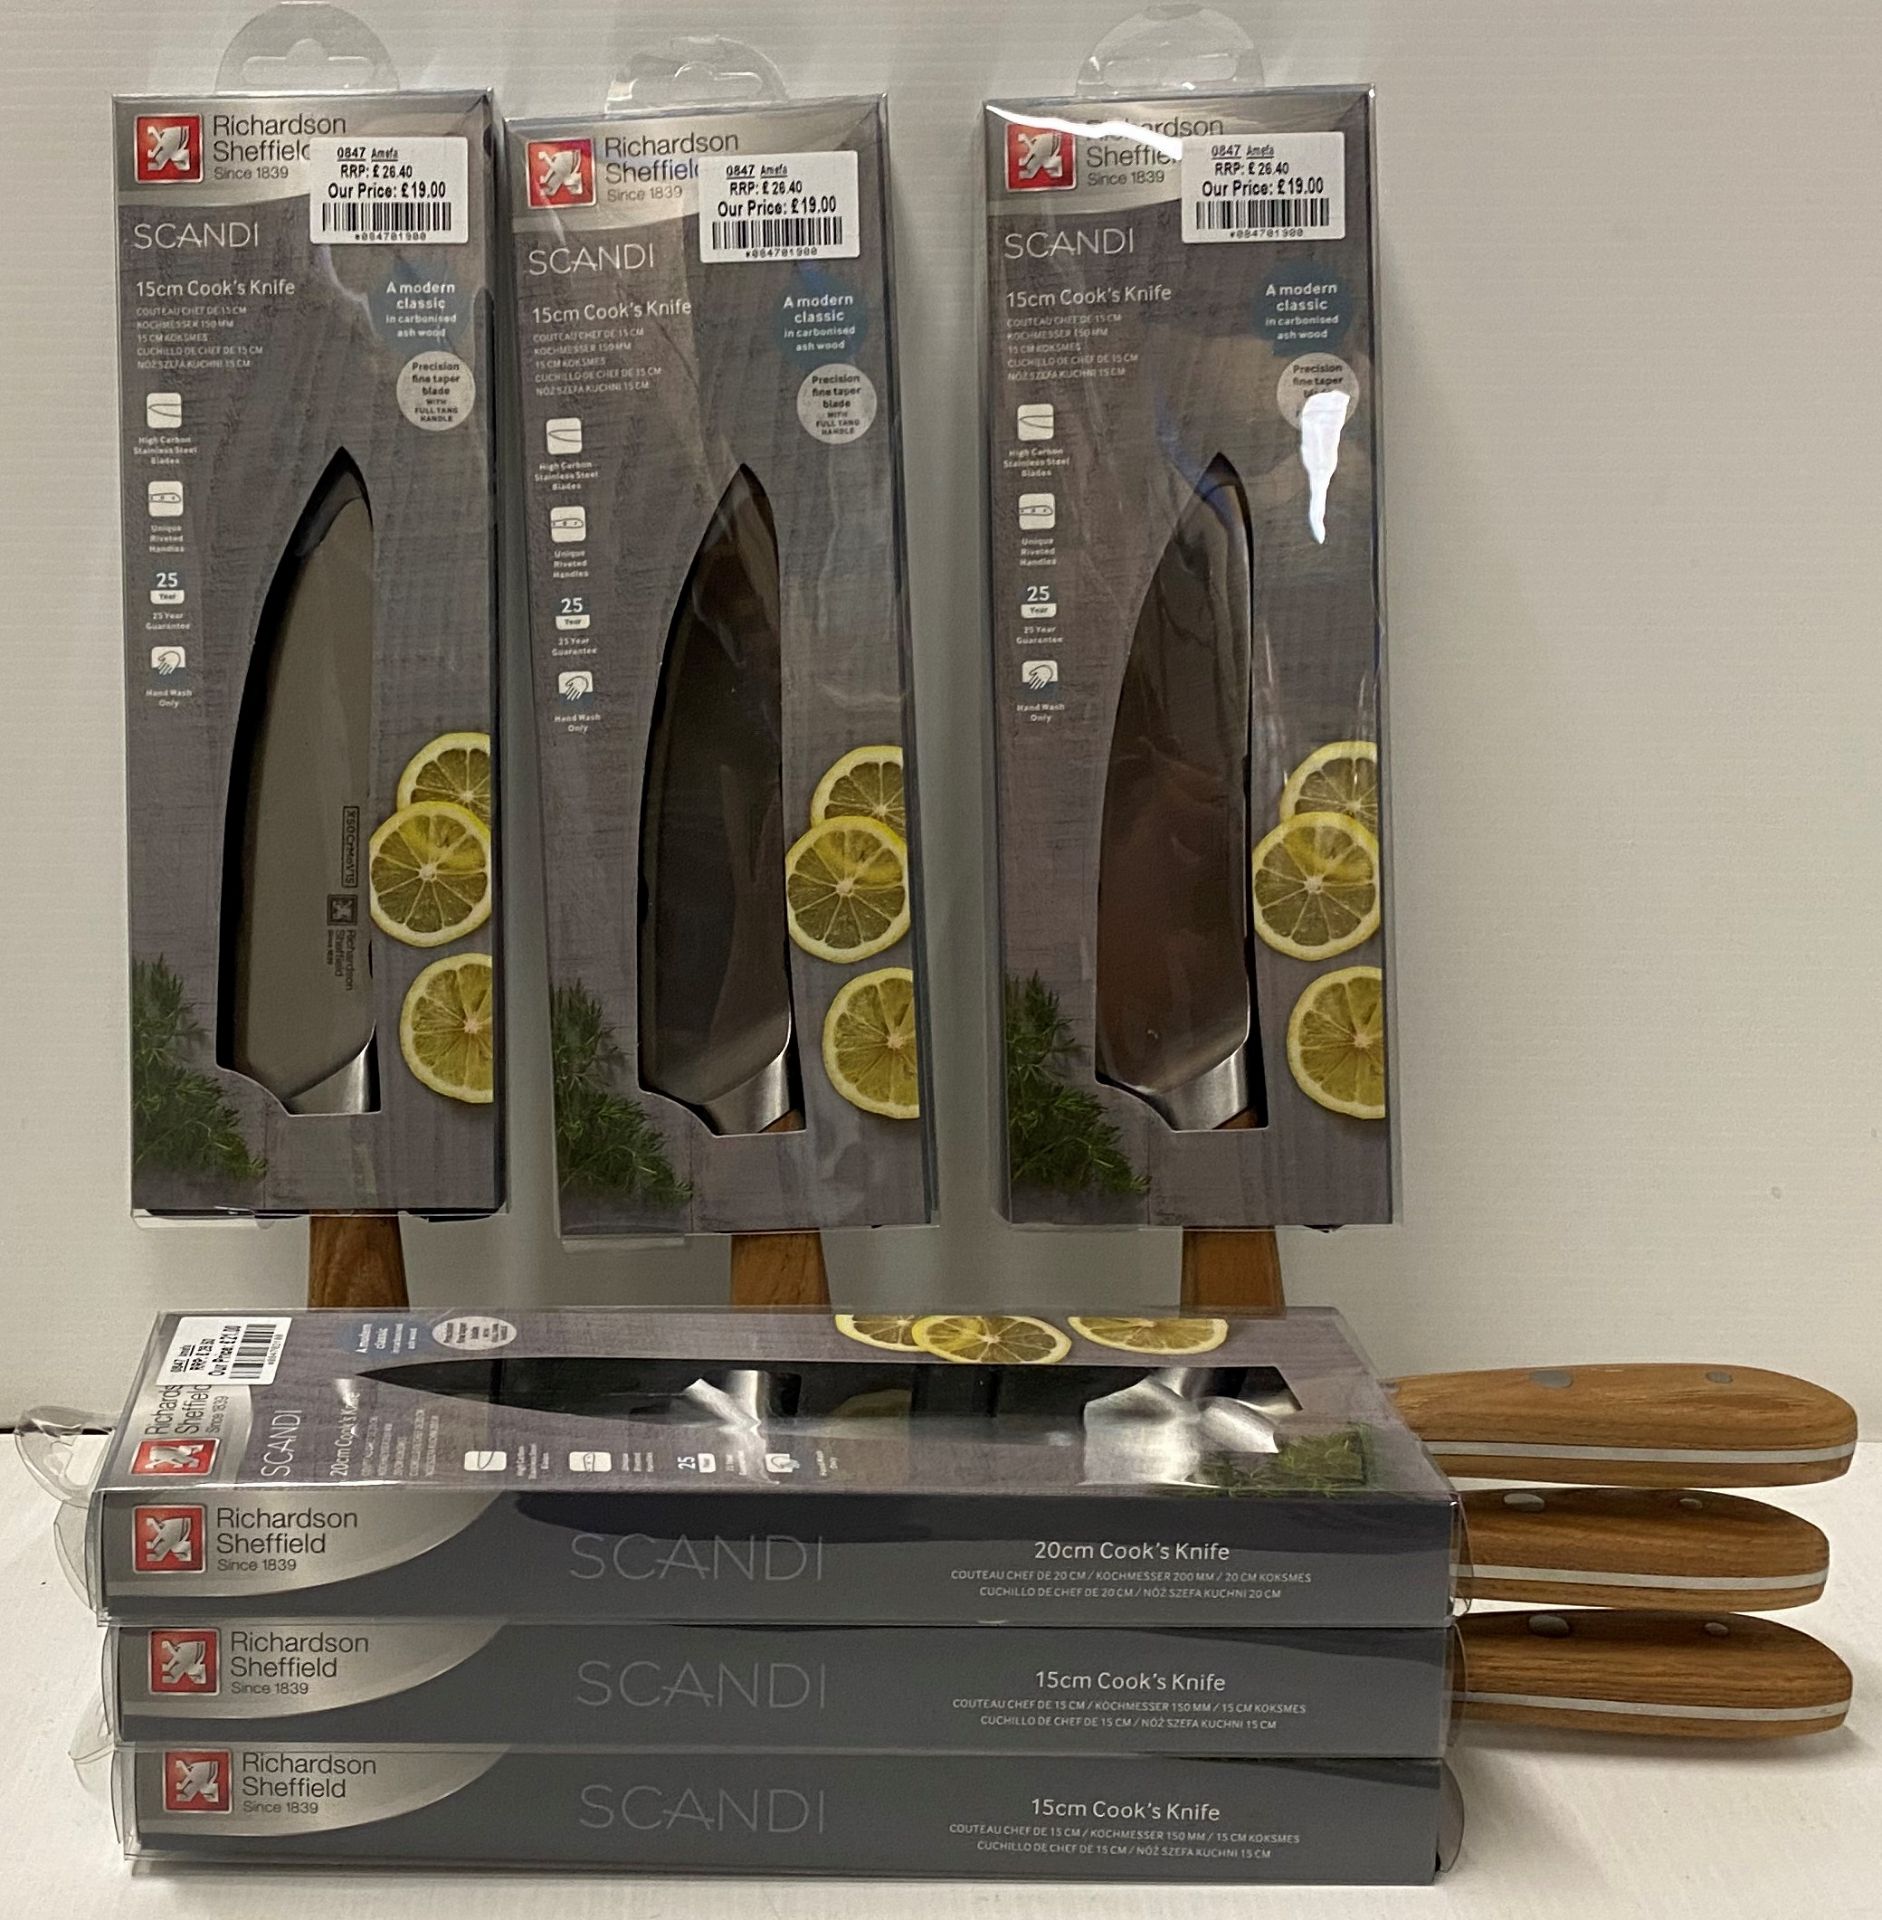 6 x Richardson Sheffield Scandi stainless steel 15cm cook's knives RRP £26.